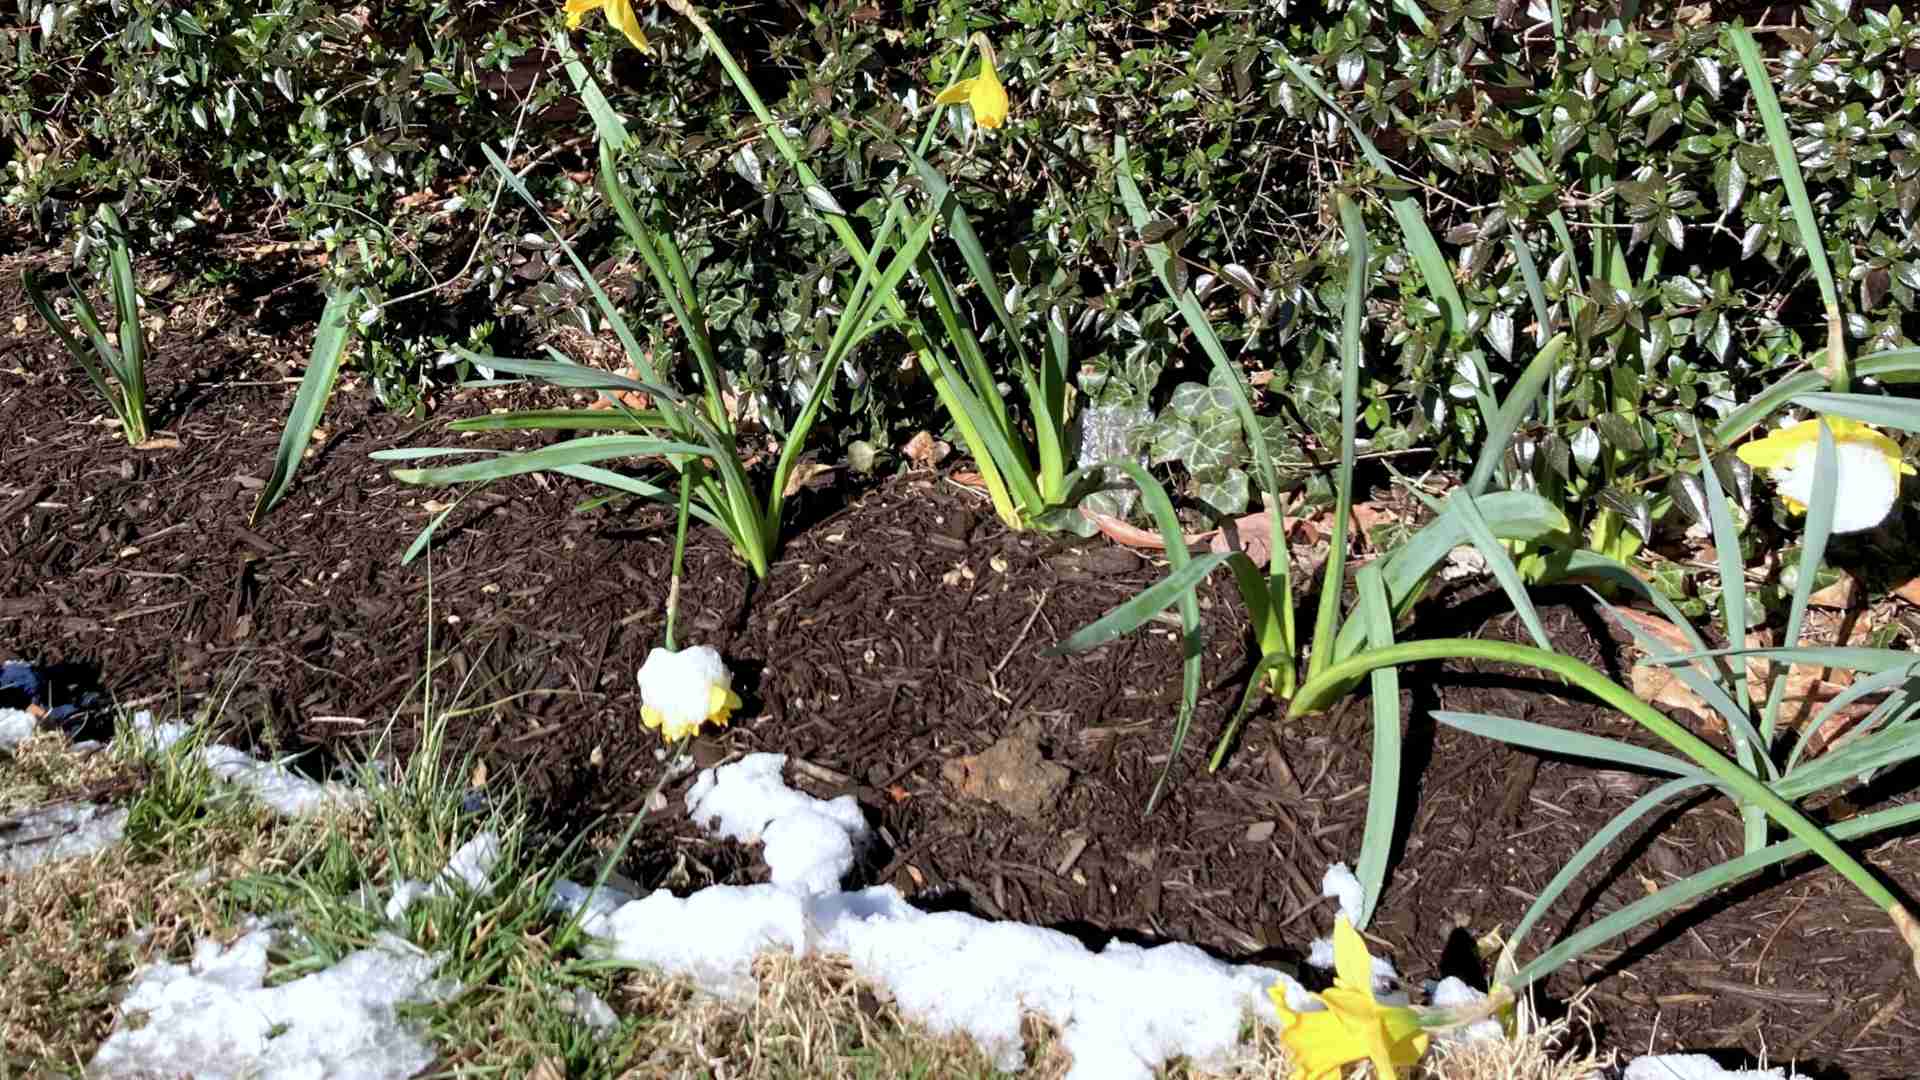 Spring: mixing fresh blooms with snow!